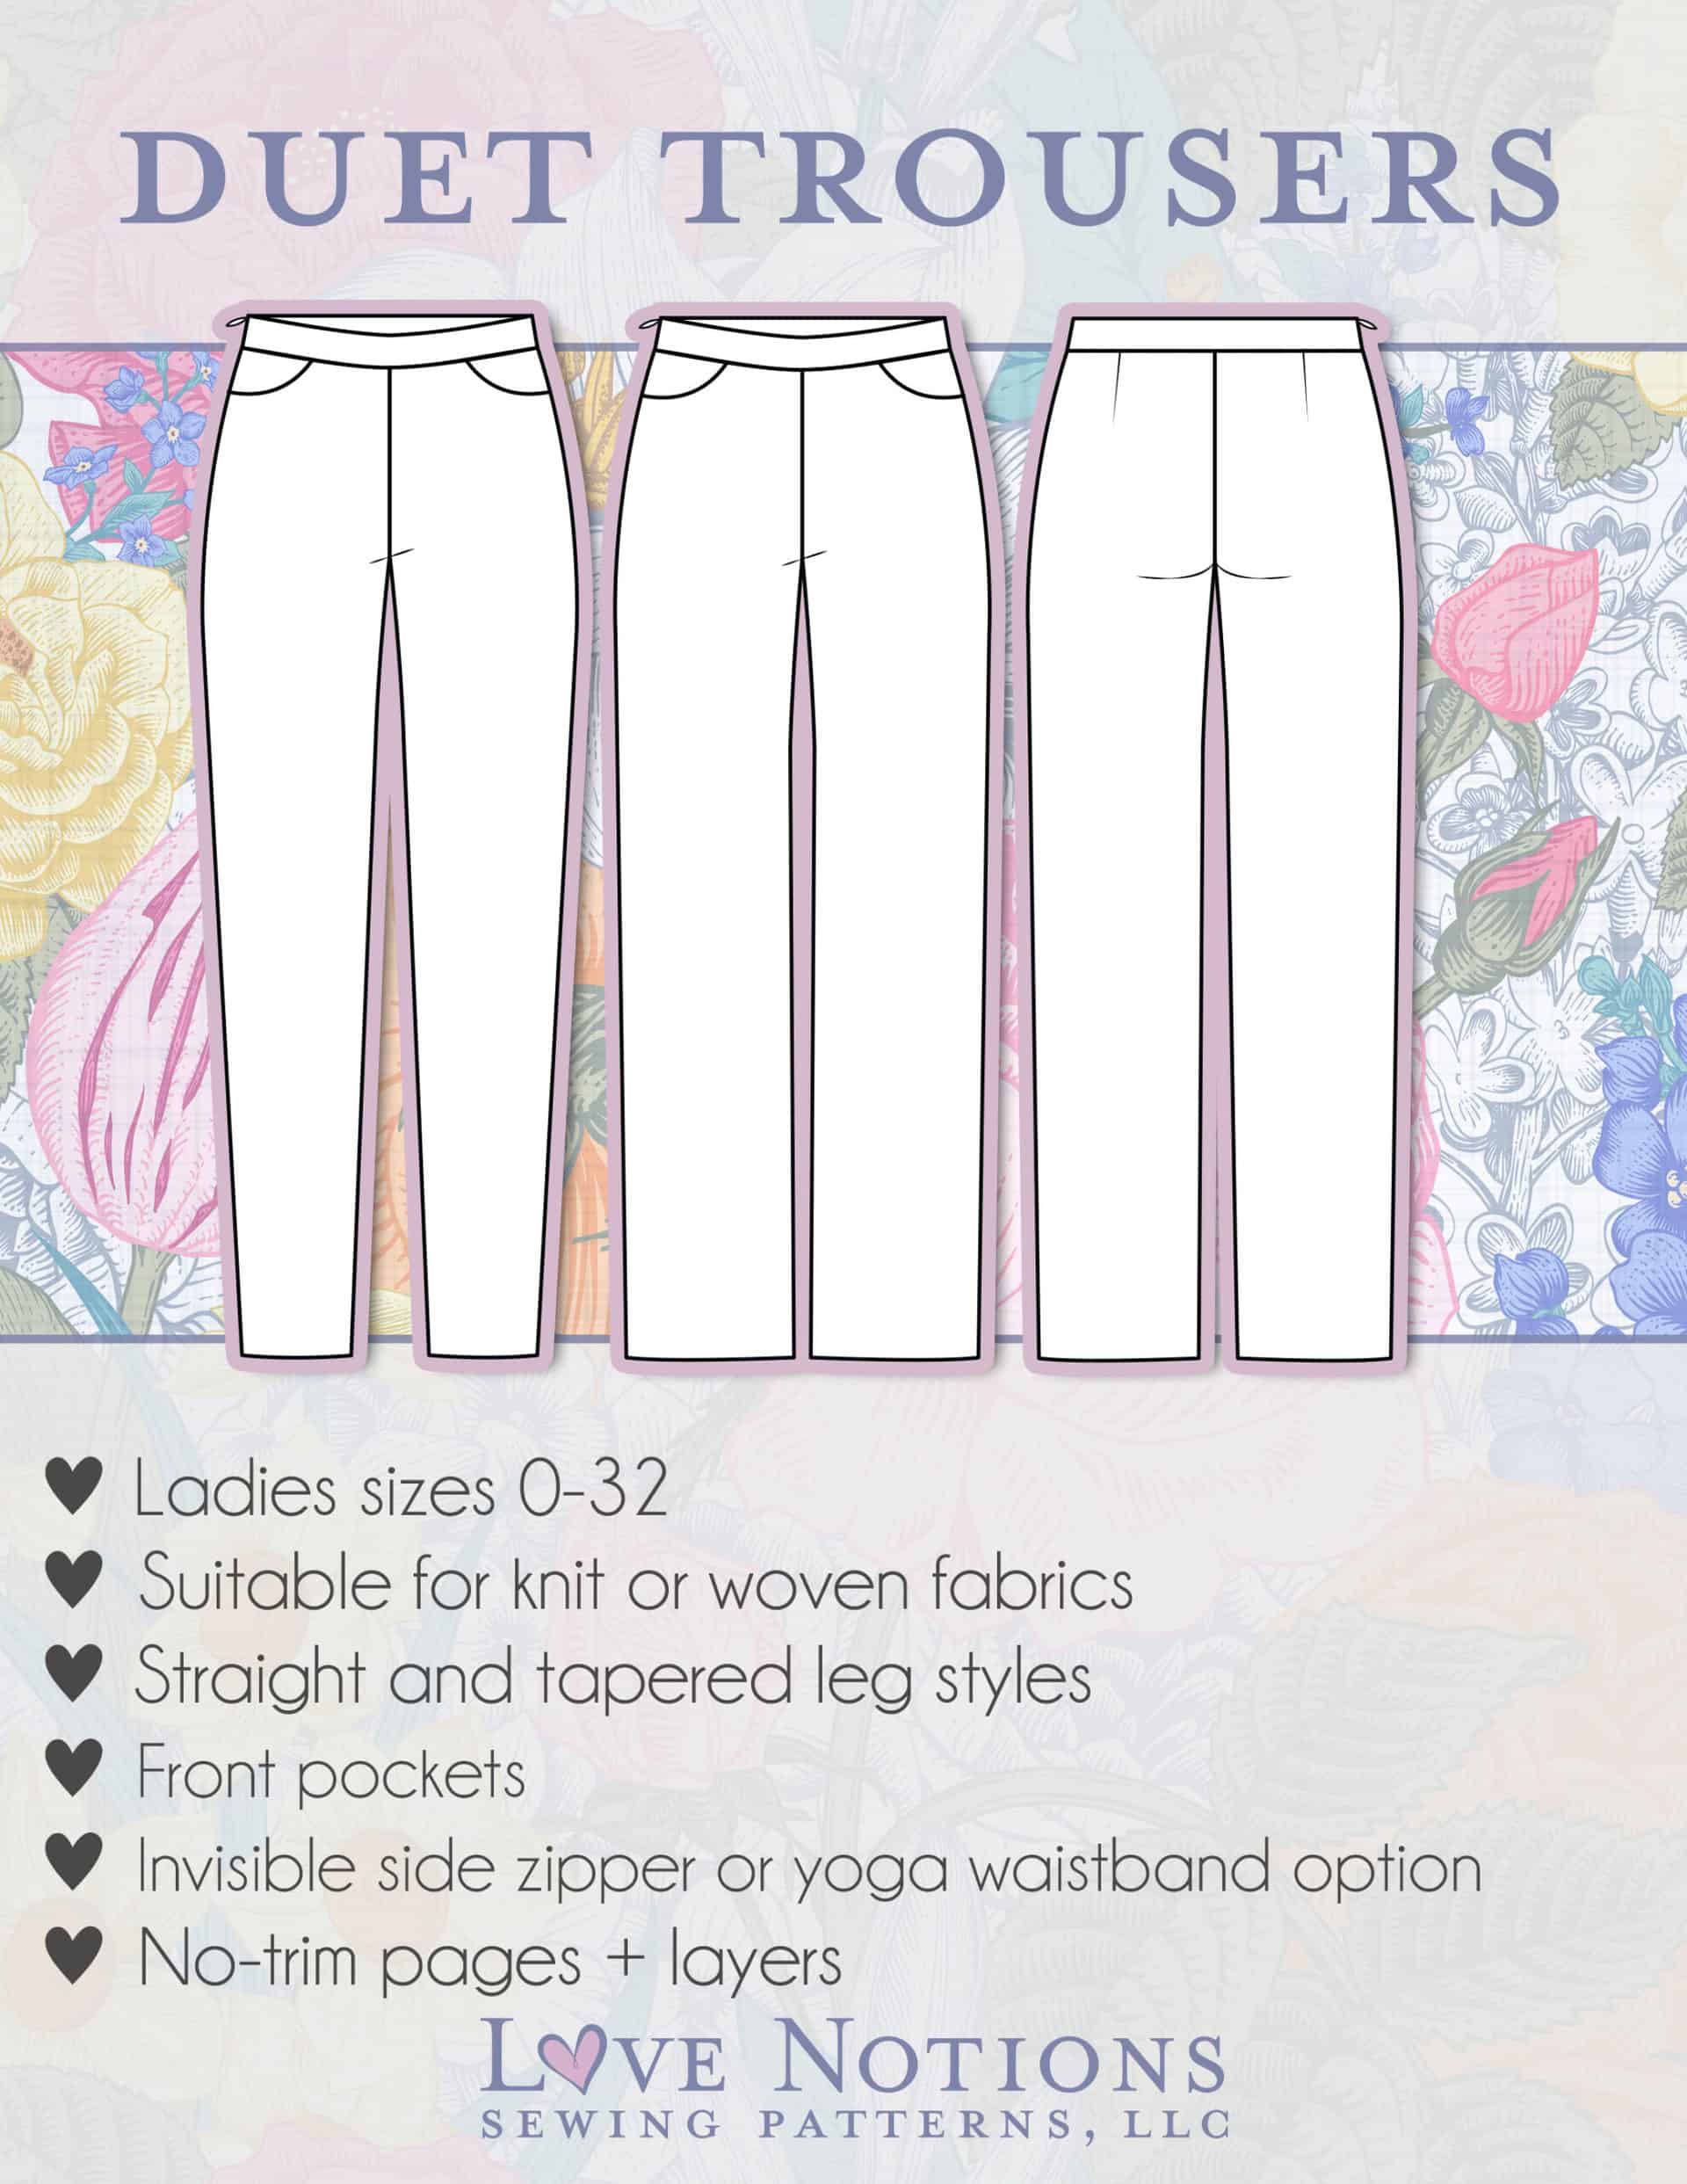 Duet Trousers cover update